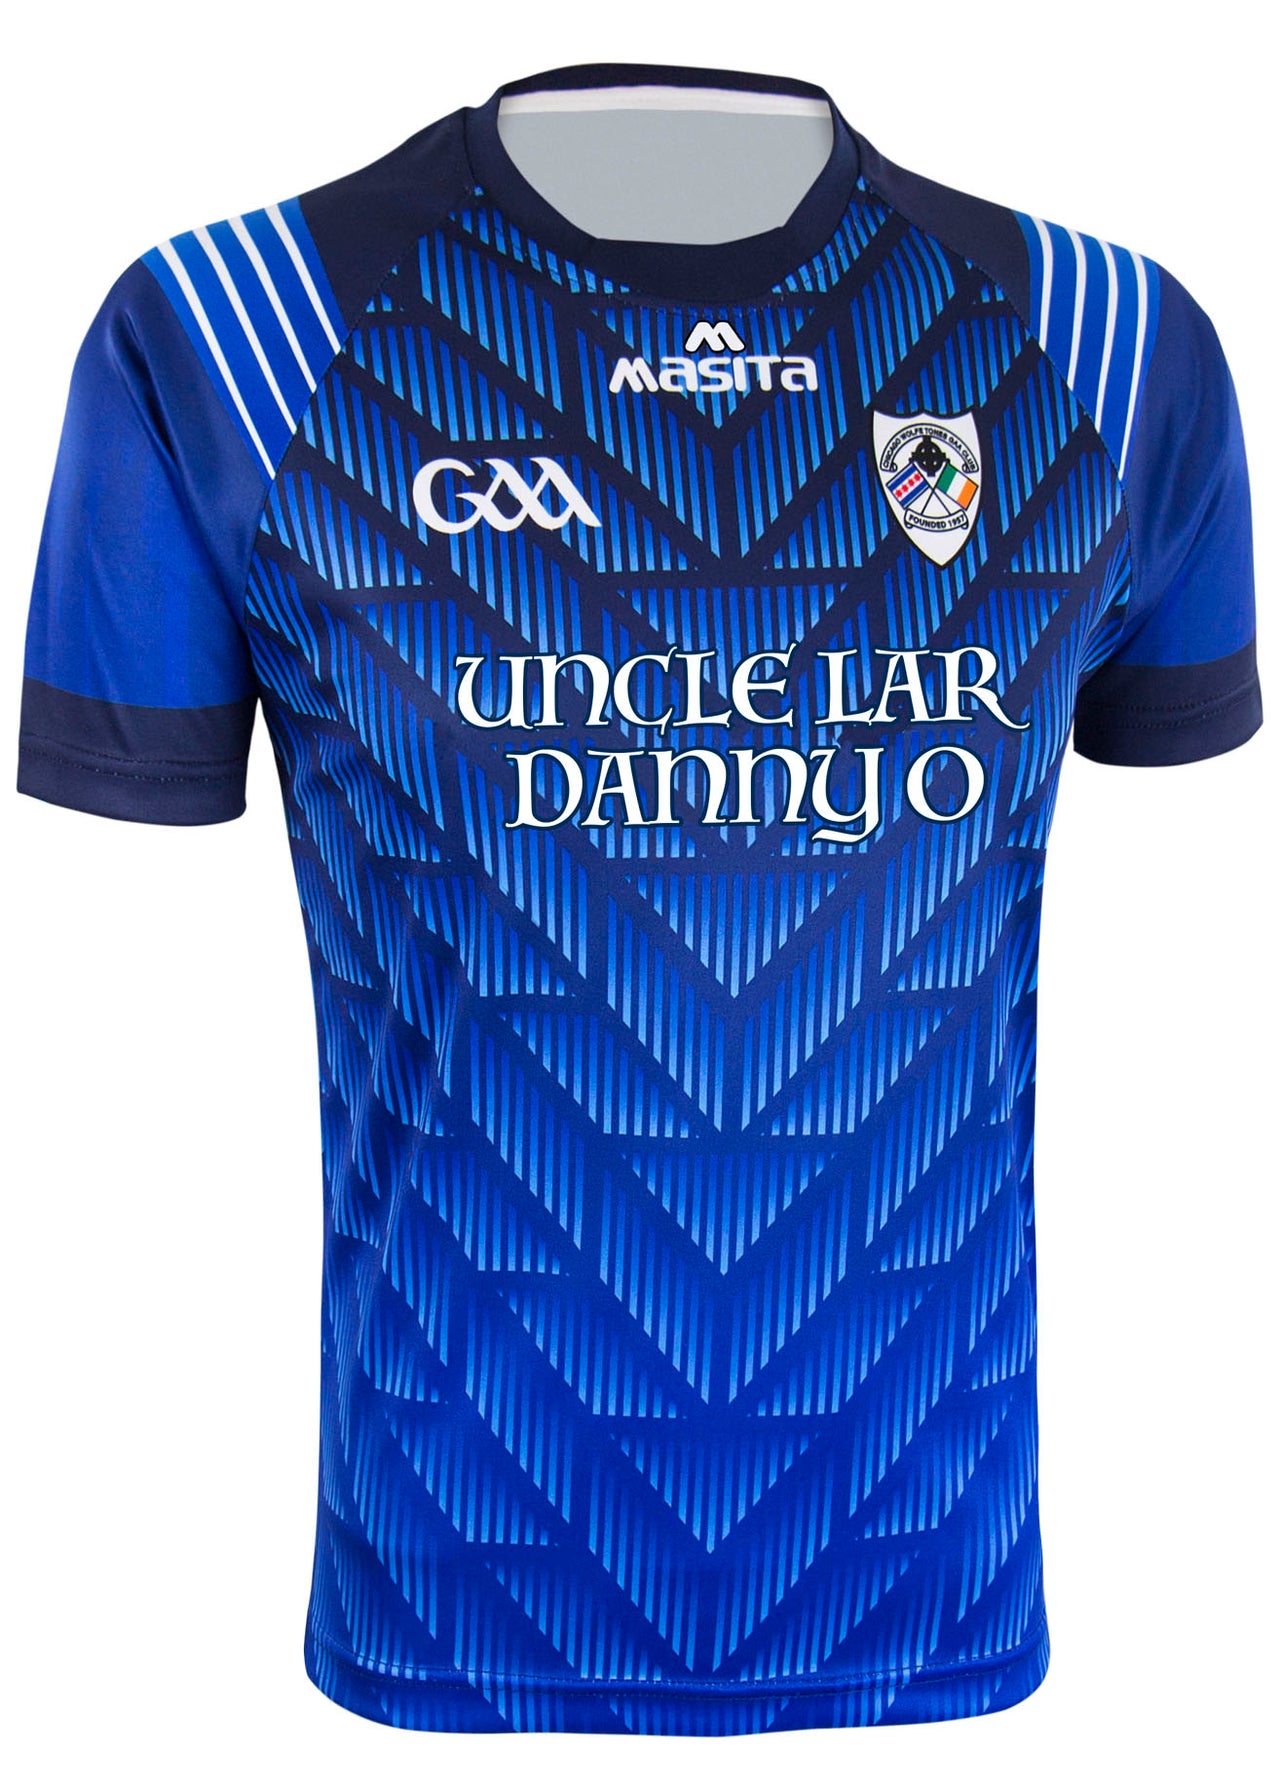 Chicago Wolfe Tones Away Jersey Player Fit Adult